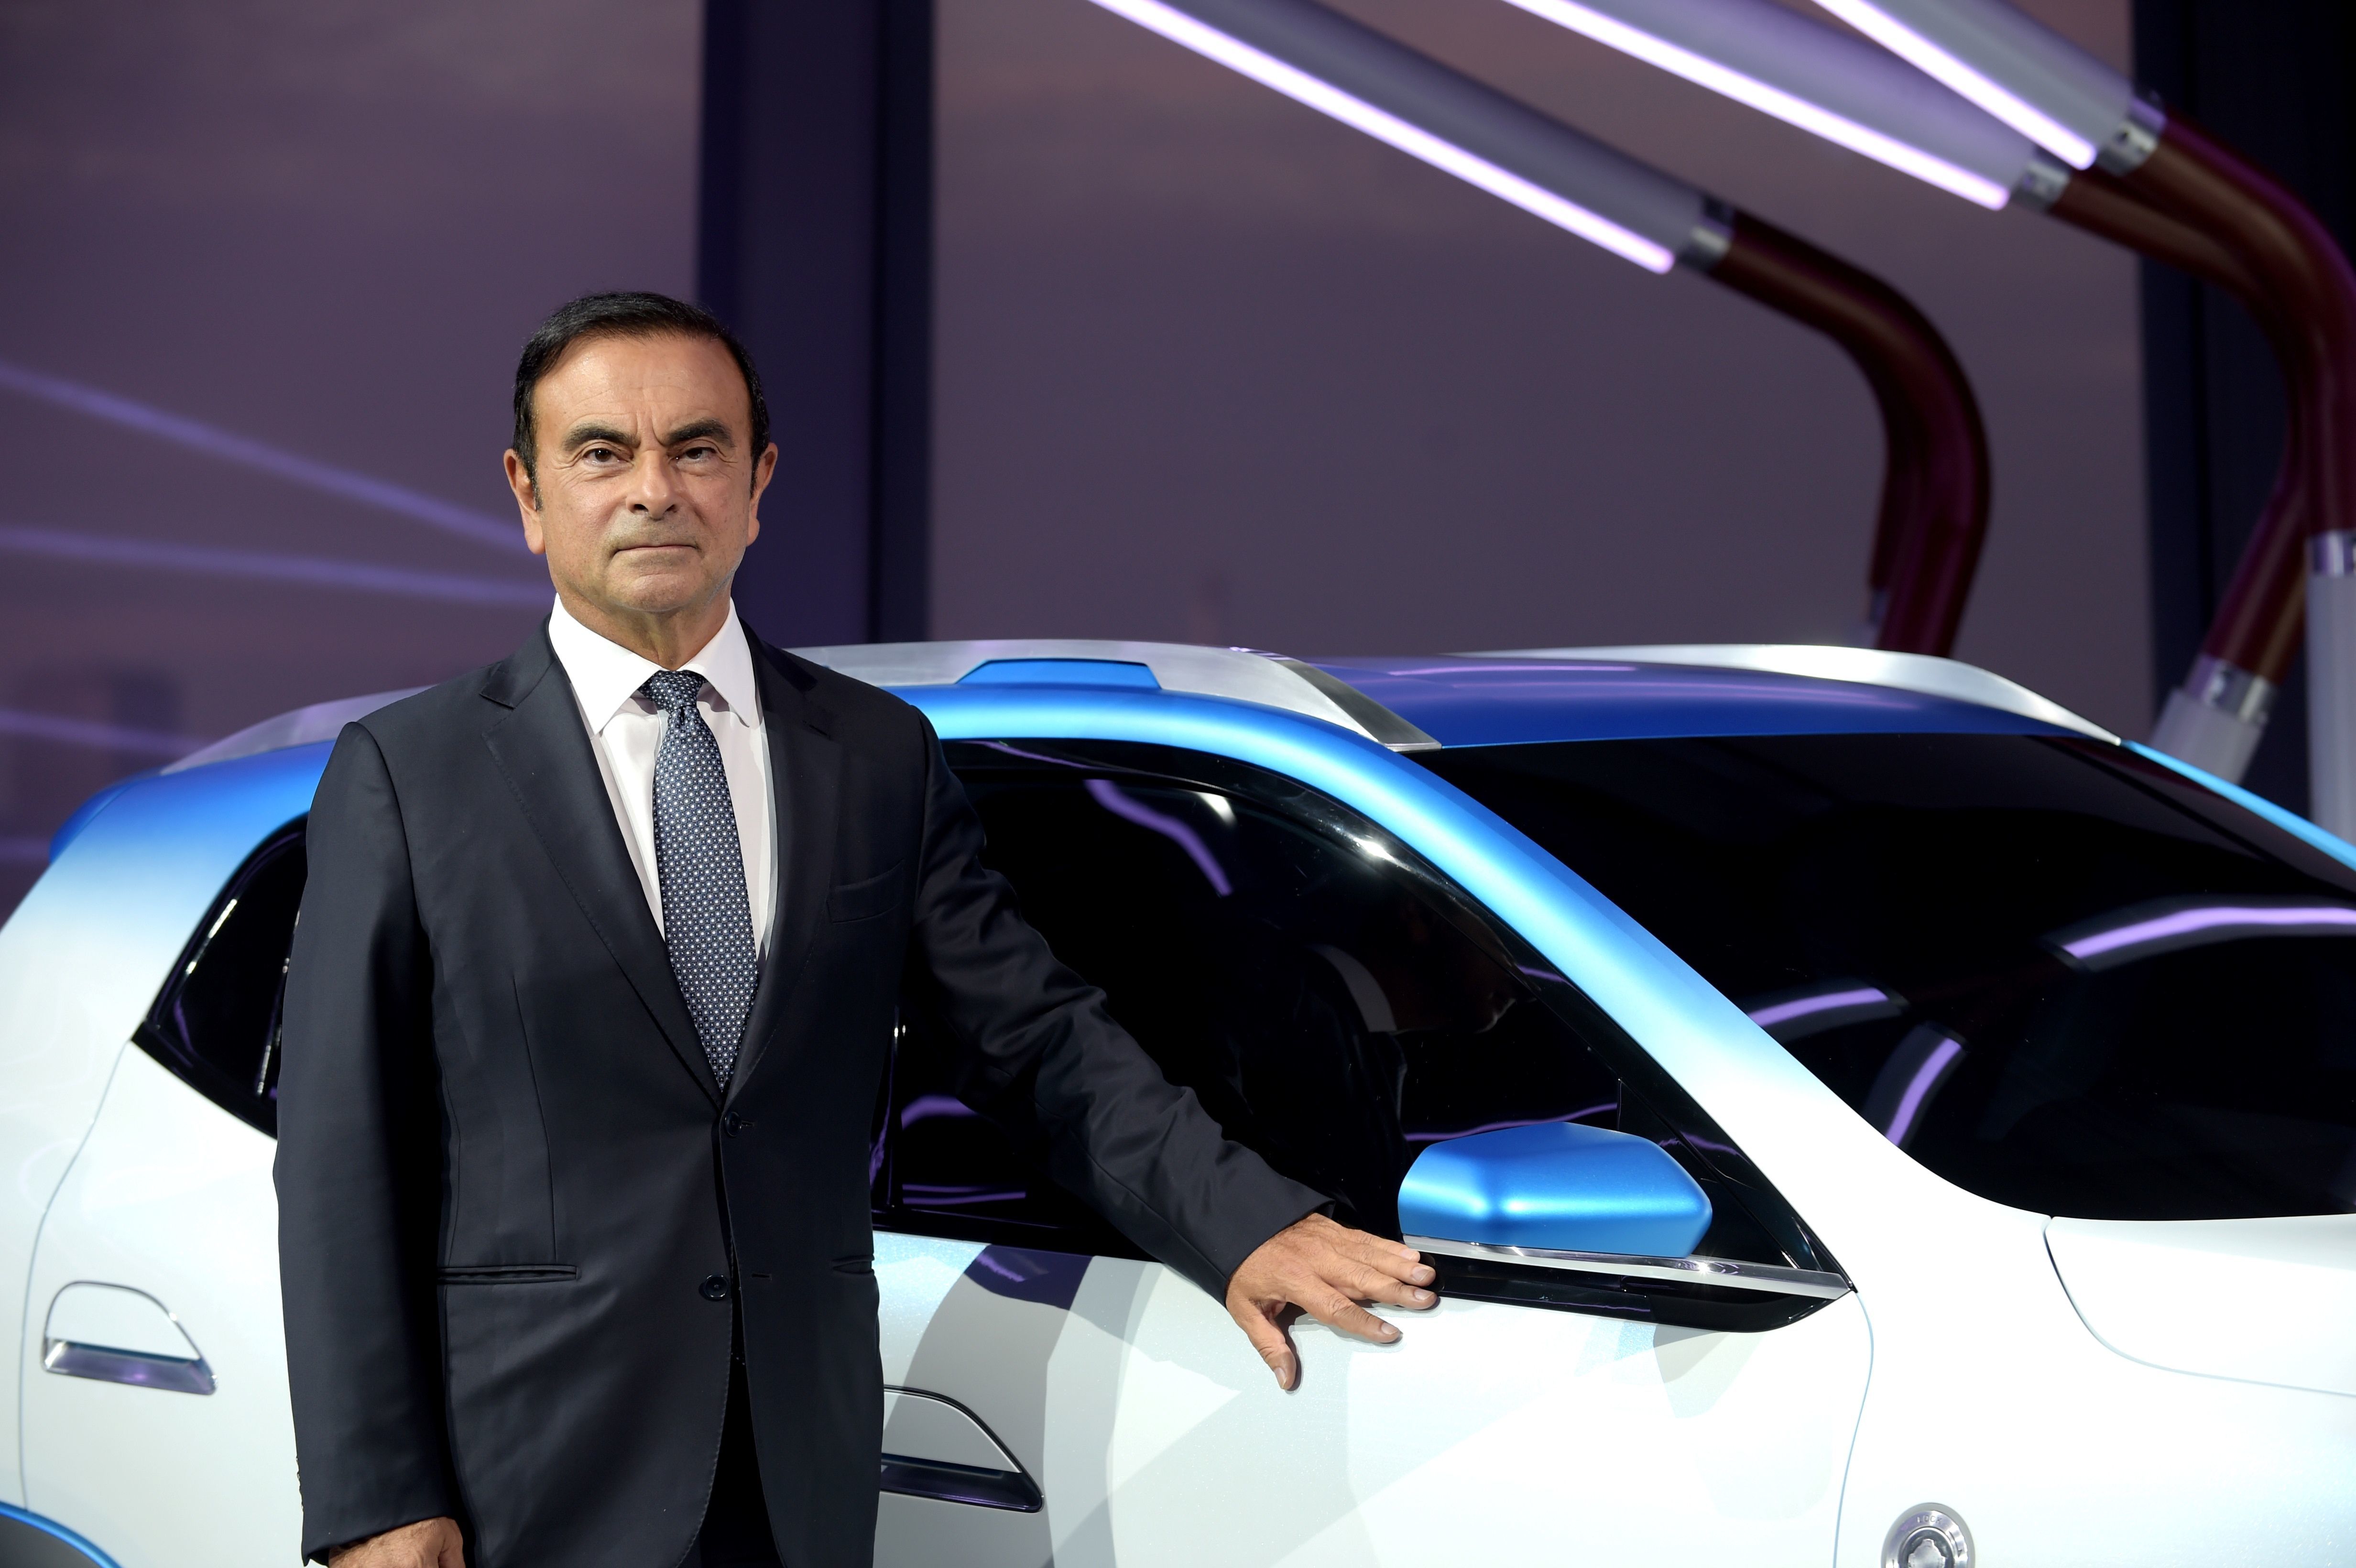 (FILES) In this file photo taken on October 01, 2018 then Chairman and CEO of Renault-Nissan-Mitsubishi Carlos Ghosn presents the Renault K-ZE for the Chinese market during a world premiere as part of an Renault 'electric evening' on the eve of the first press day of the Paris Motor Show. - Former Nissan chief Carlos Ghosn, who was on bail in Tokyo awaiting trial on financial misconduct charges, has arrived in Beirut, Lebanese official and security sources said on December 30, 2019. (Photo by ERIC PIERMONT / AFP)